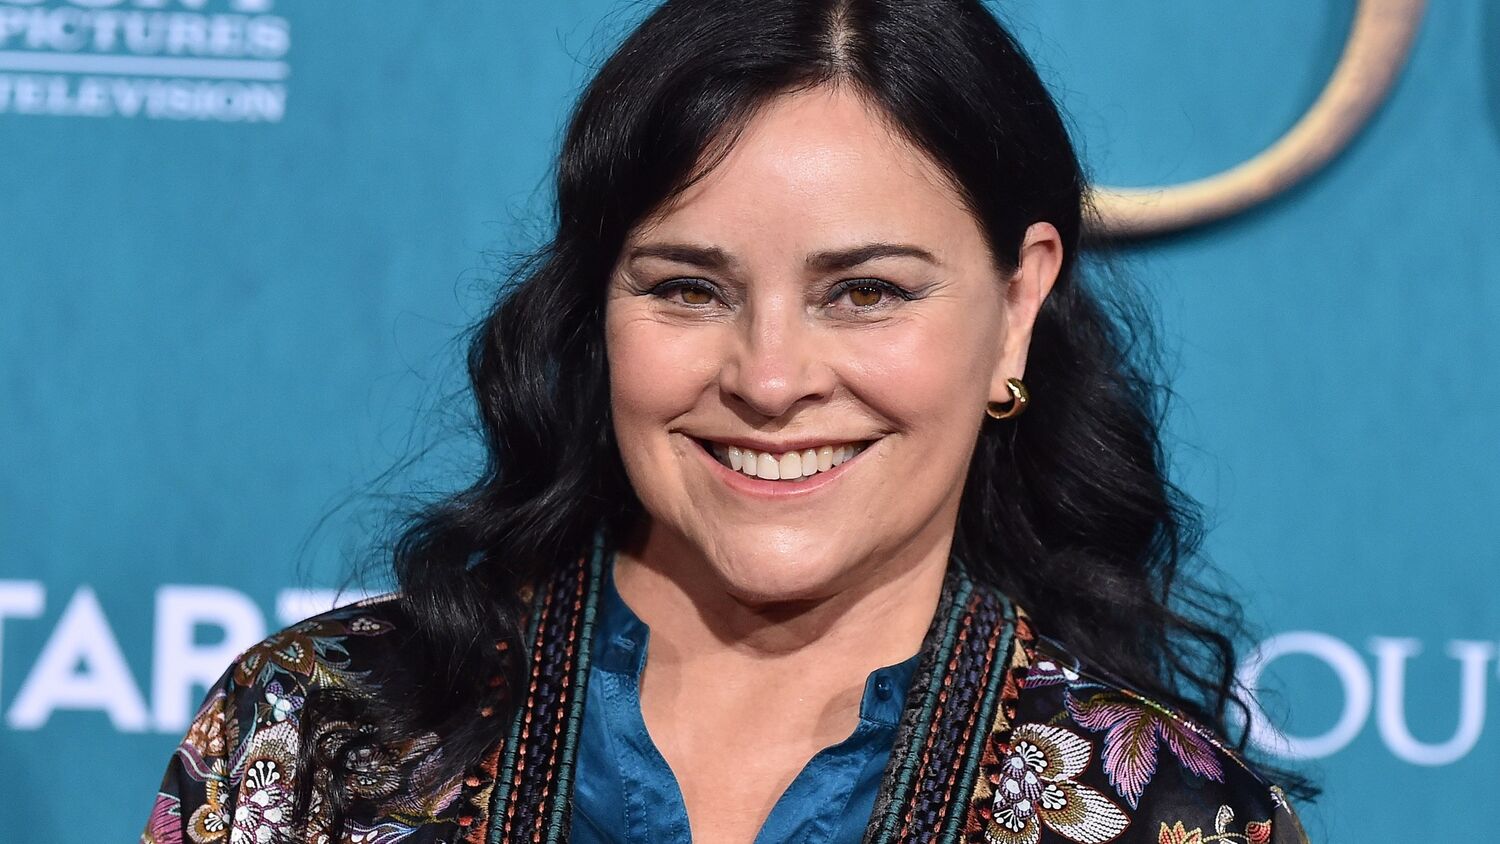 A close-up photo of Diana Gabaldon standing in front of an awards screen at a ceremony. She has long dark hair and is smiling at the camera.